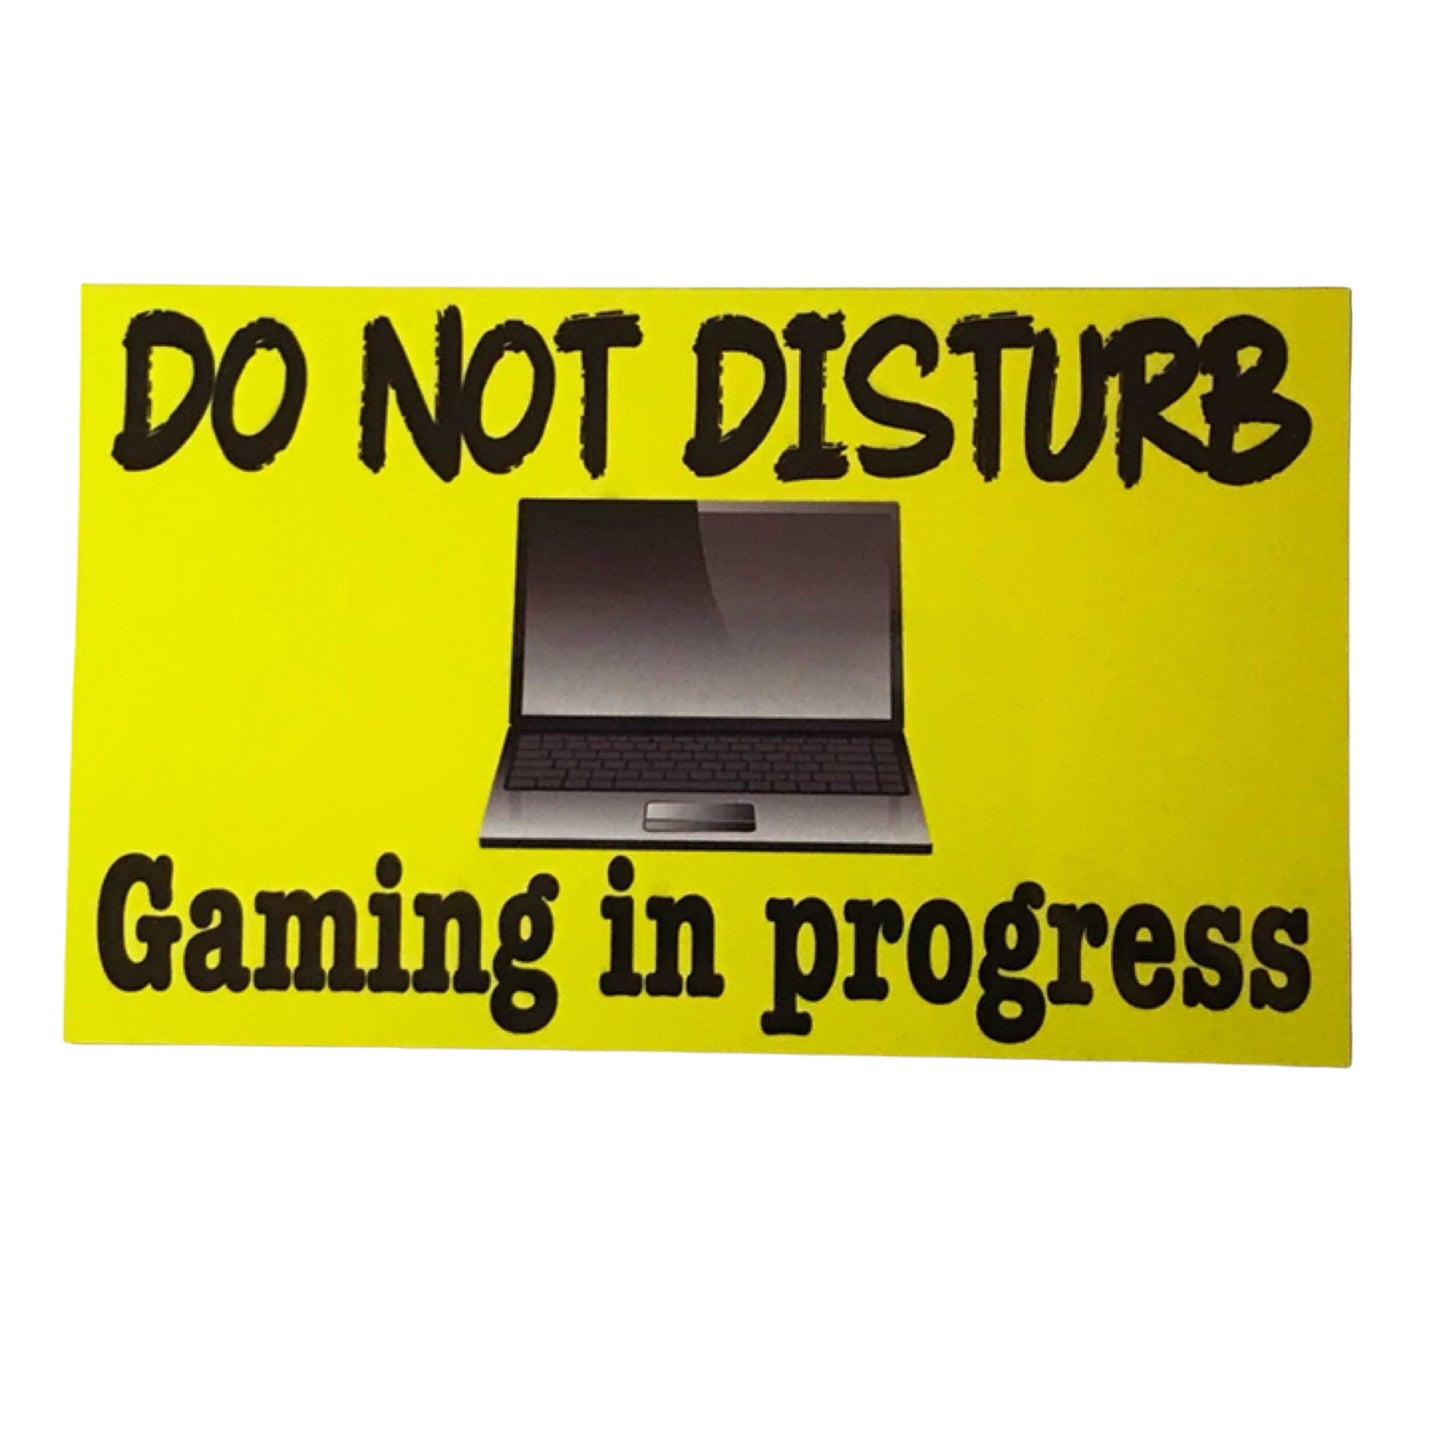 Computer Gaming In Progress Do Not Disturb Sign - The Renmy Store Homewares & Gifts 